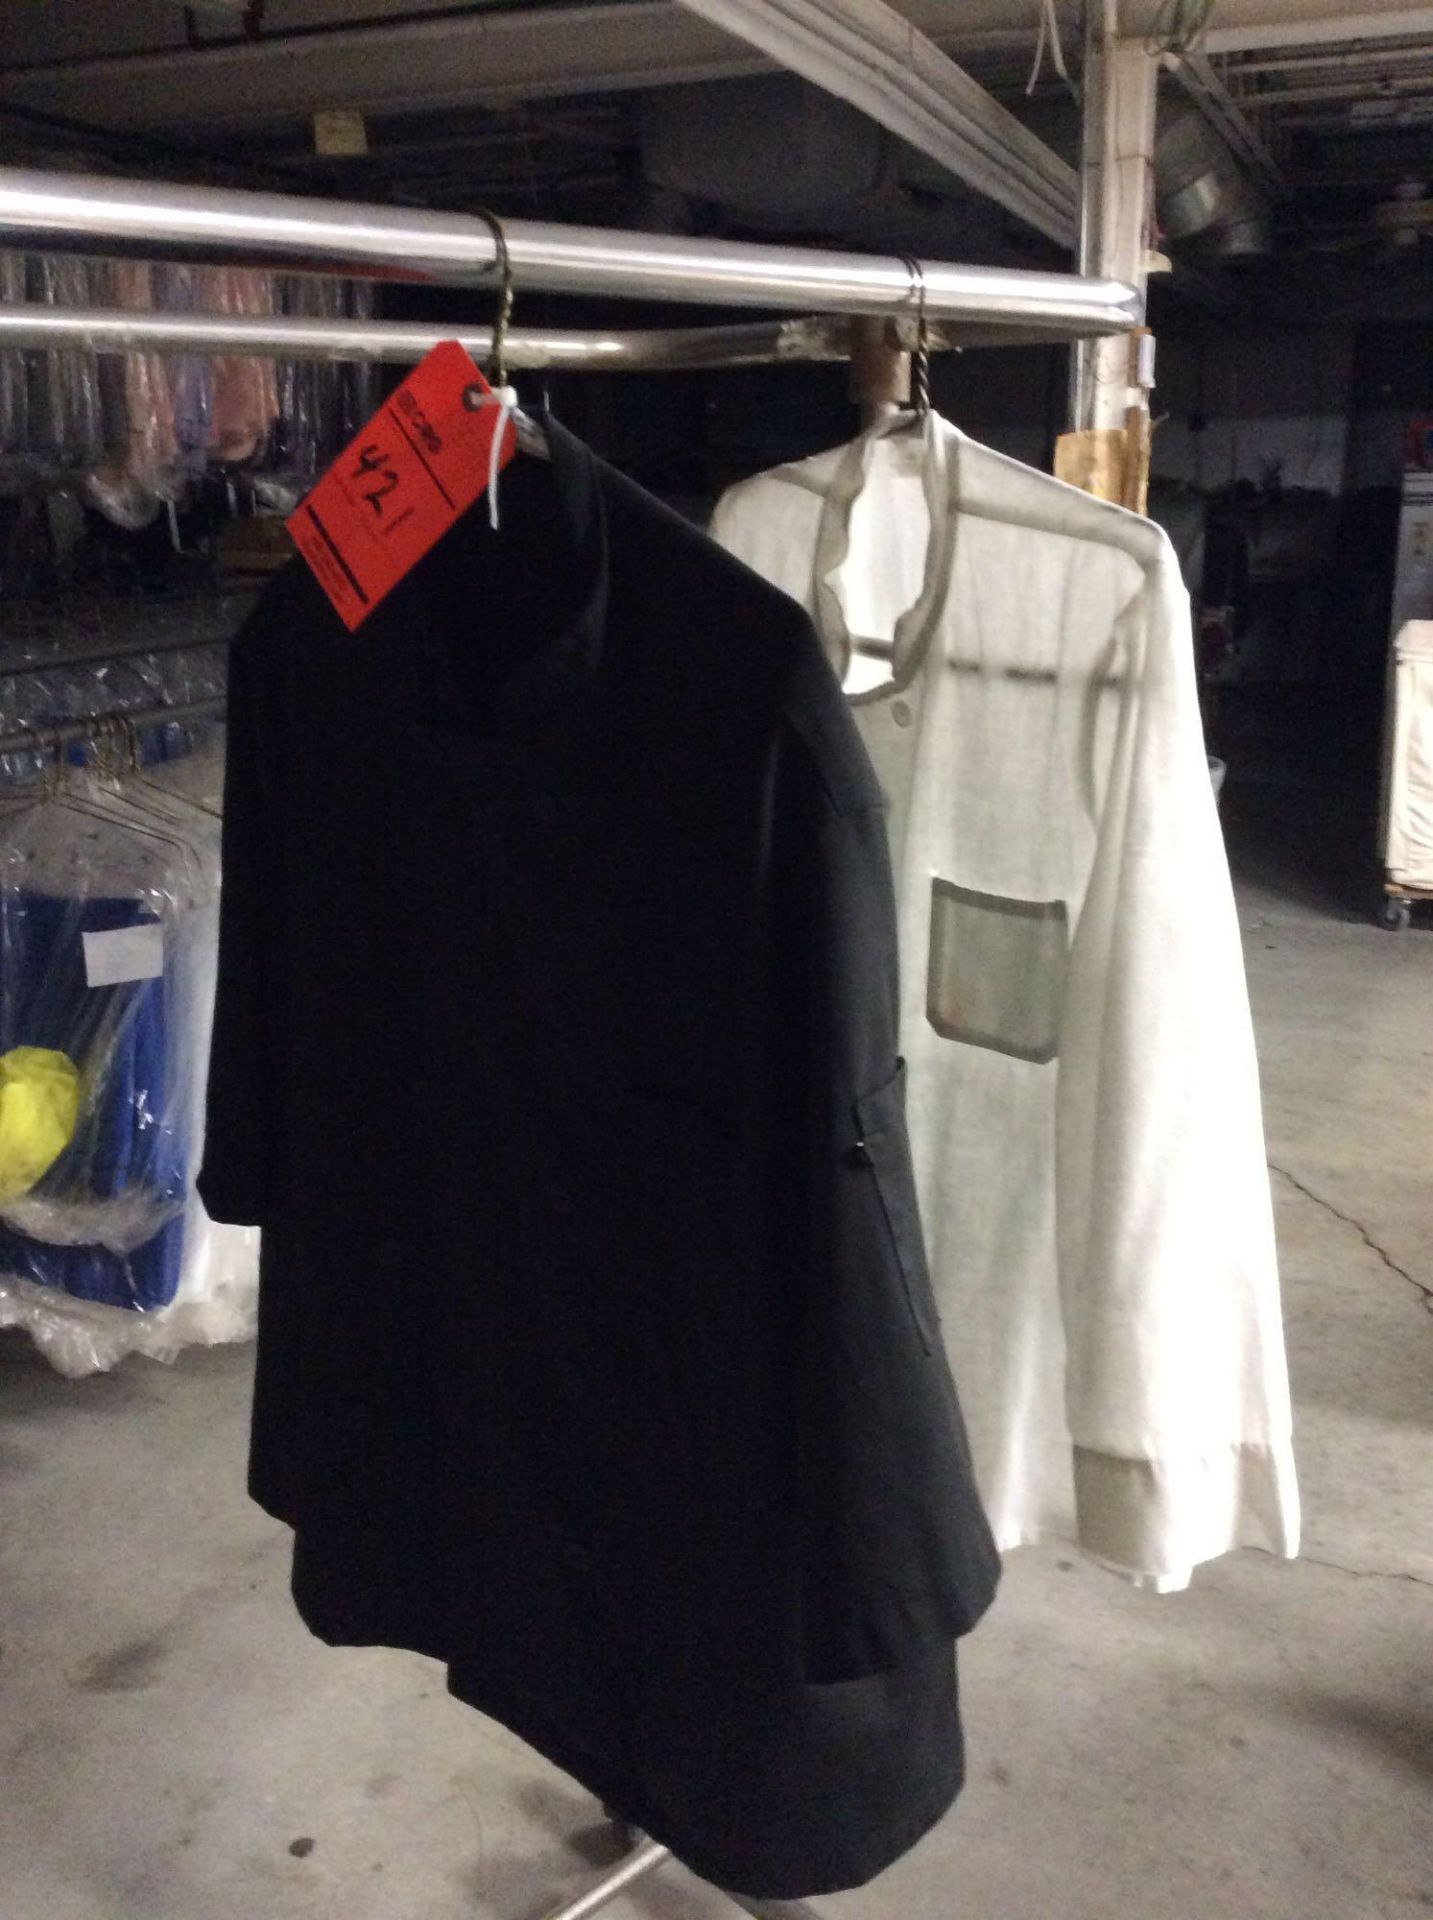 Lot of assorted chef coats including: (1) White Size 40; (7) White Size 42; (5) White Size Large; (